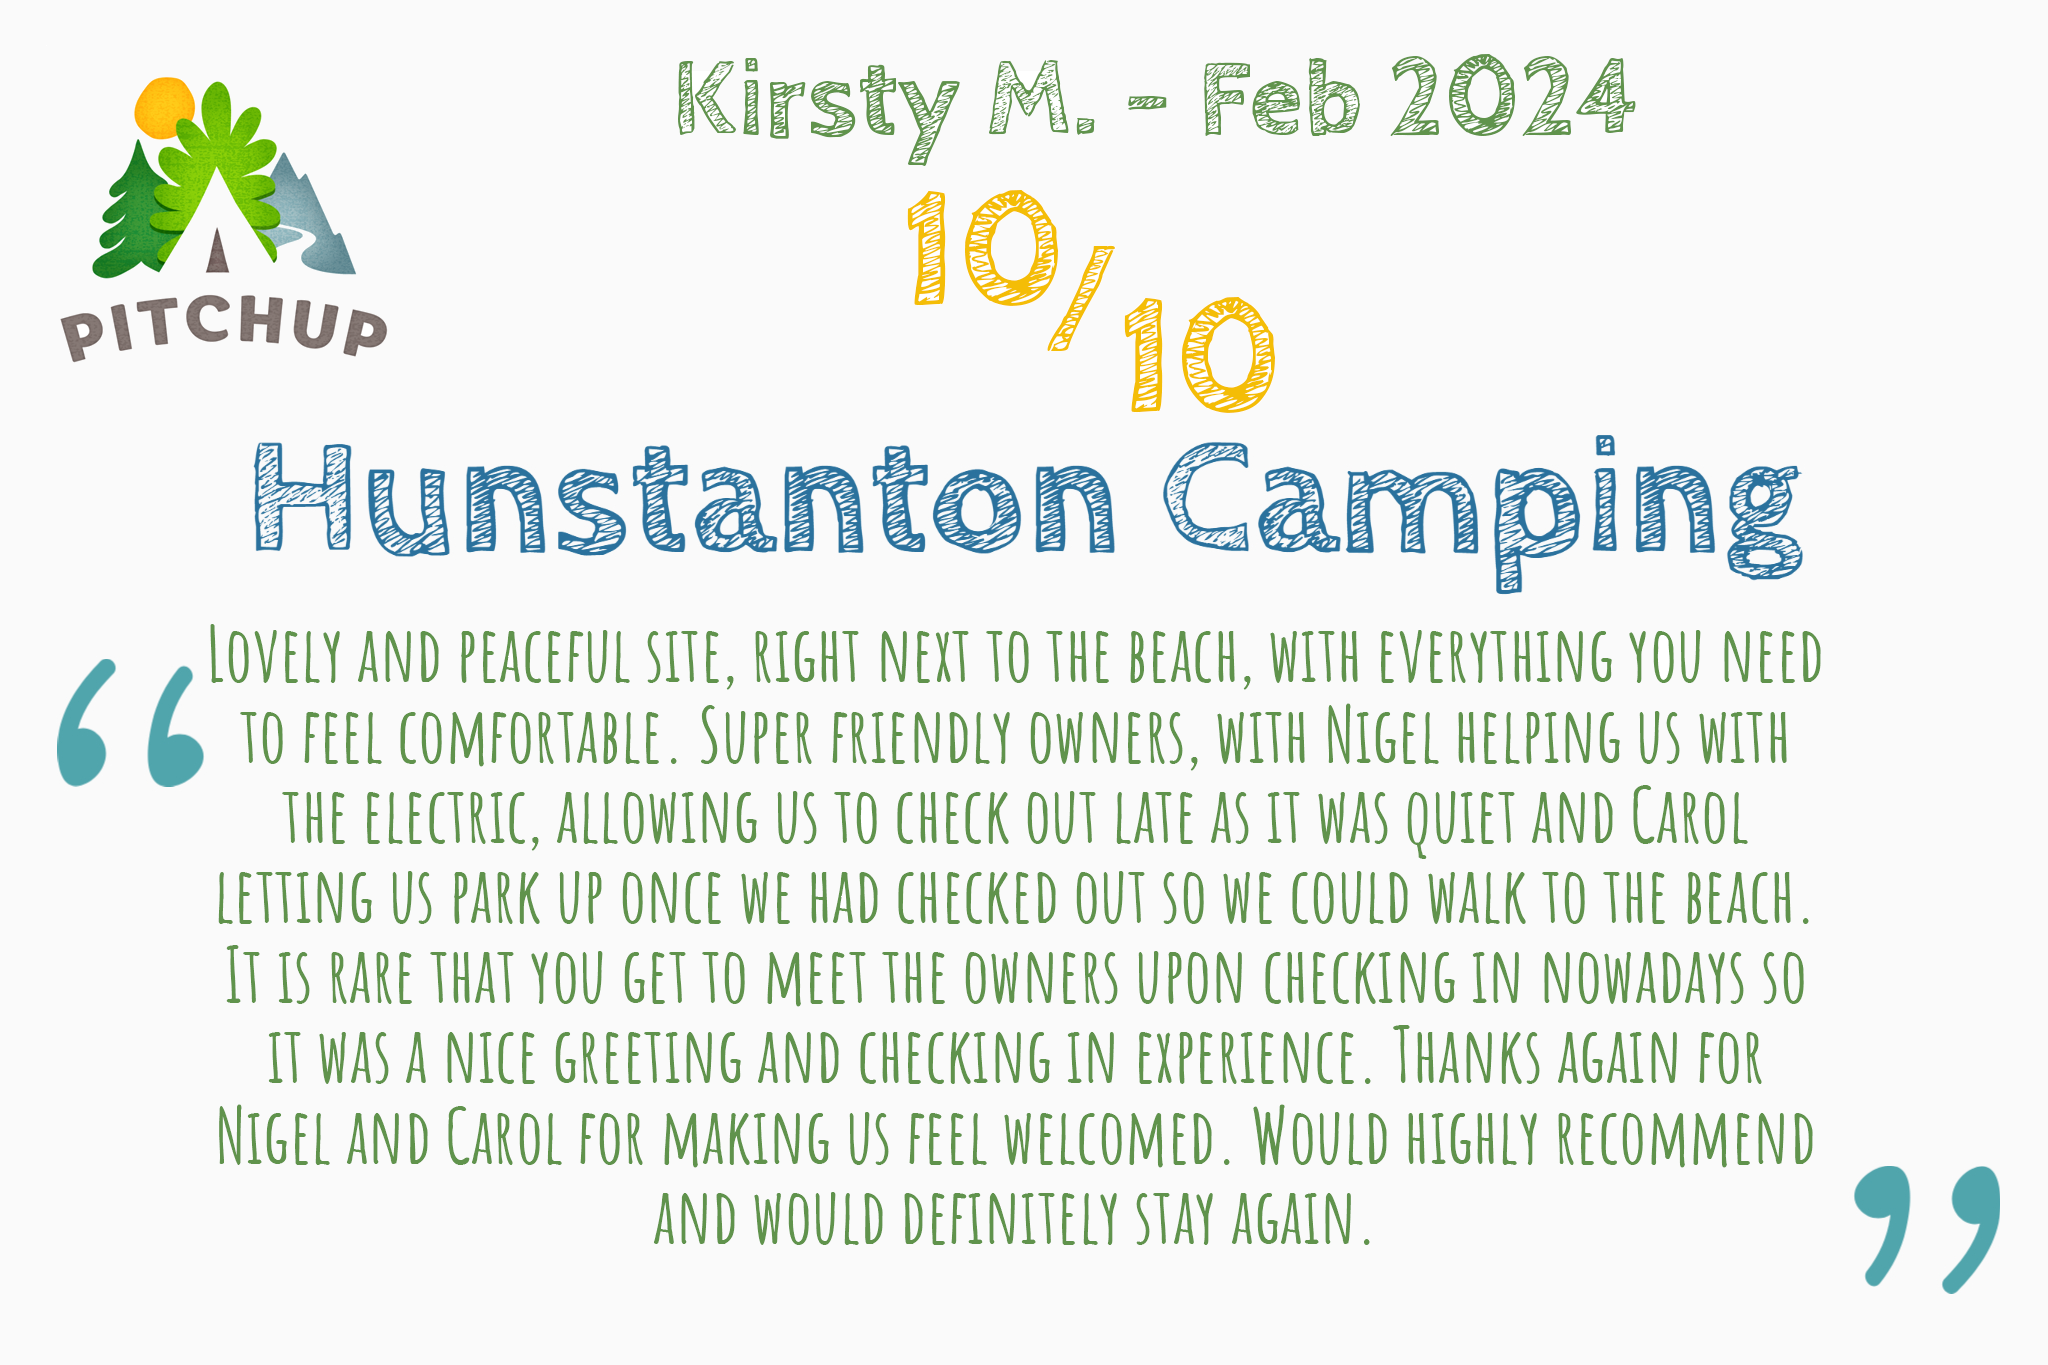 10/10 pitchup review from kirsty m that says "Lovely and peaceful site, right next to the beach, with everything you need to feel comfortable. Super friendly owners, with Nigel helping us with the electric, allowing us to check out late as it was quiet and Carol letting us park up once we had checked out so we could walk to the beach. It is rare that you get to meet the owners upon checking in nowadays so it was a nice greeting and checking in experience. Thanks again for Nigel and Carol for making us feel welcomed. Would highly recommend and would definitely stay again."